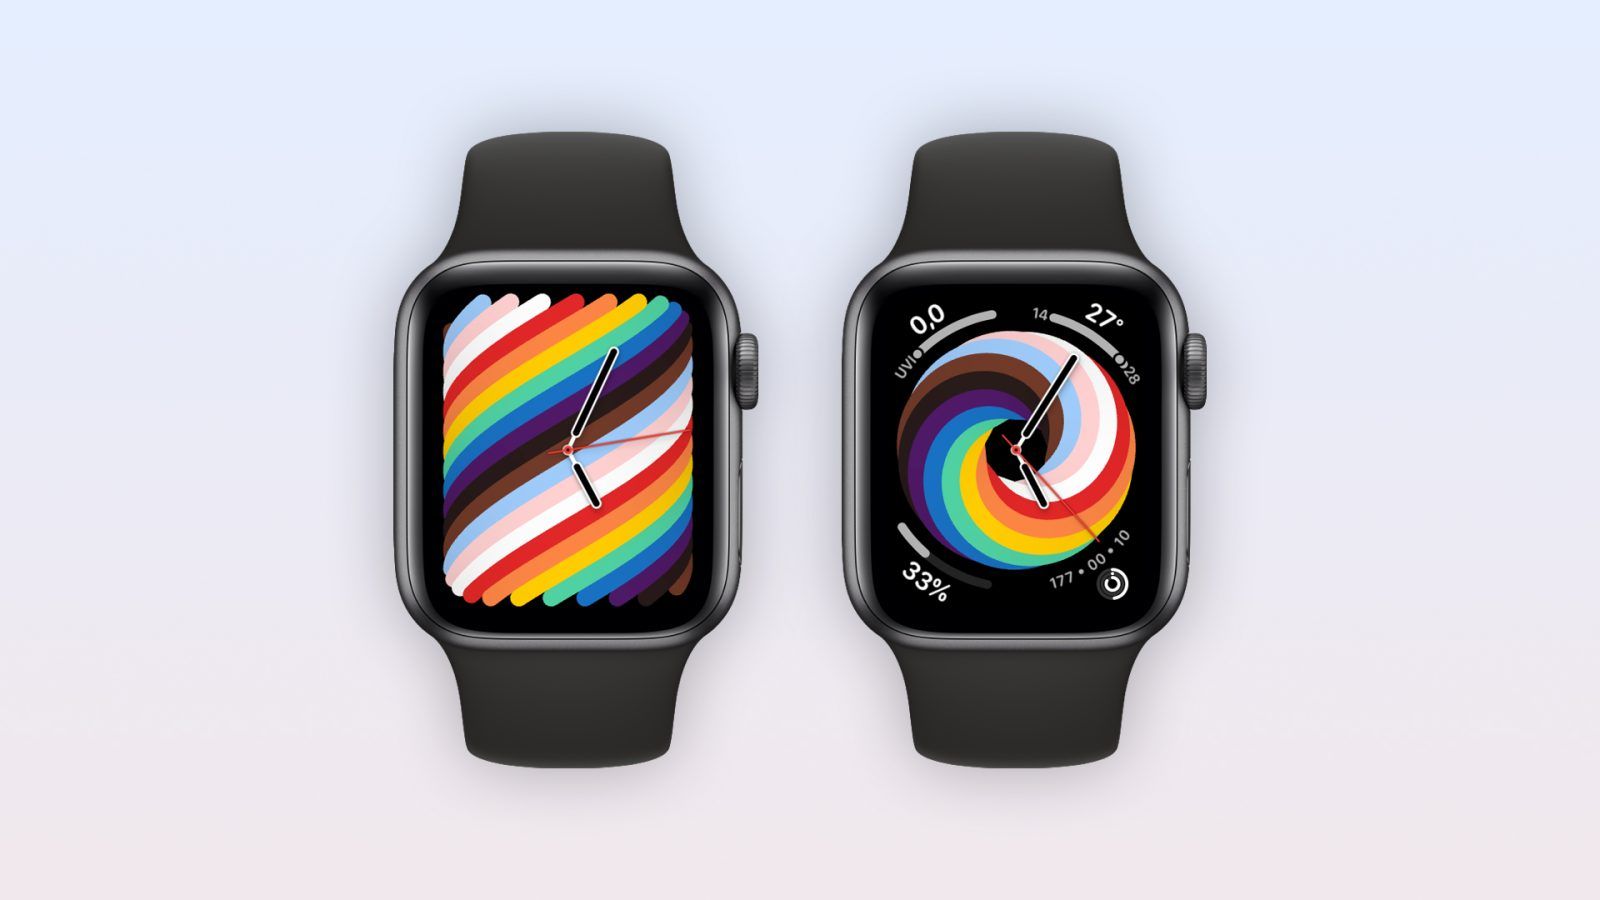 Gallery: Here's a first look at the new 2021 'Pride Woven' Apple Watch face